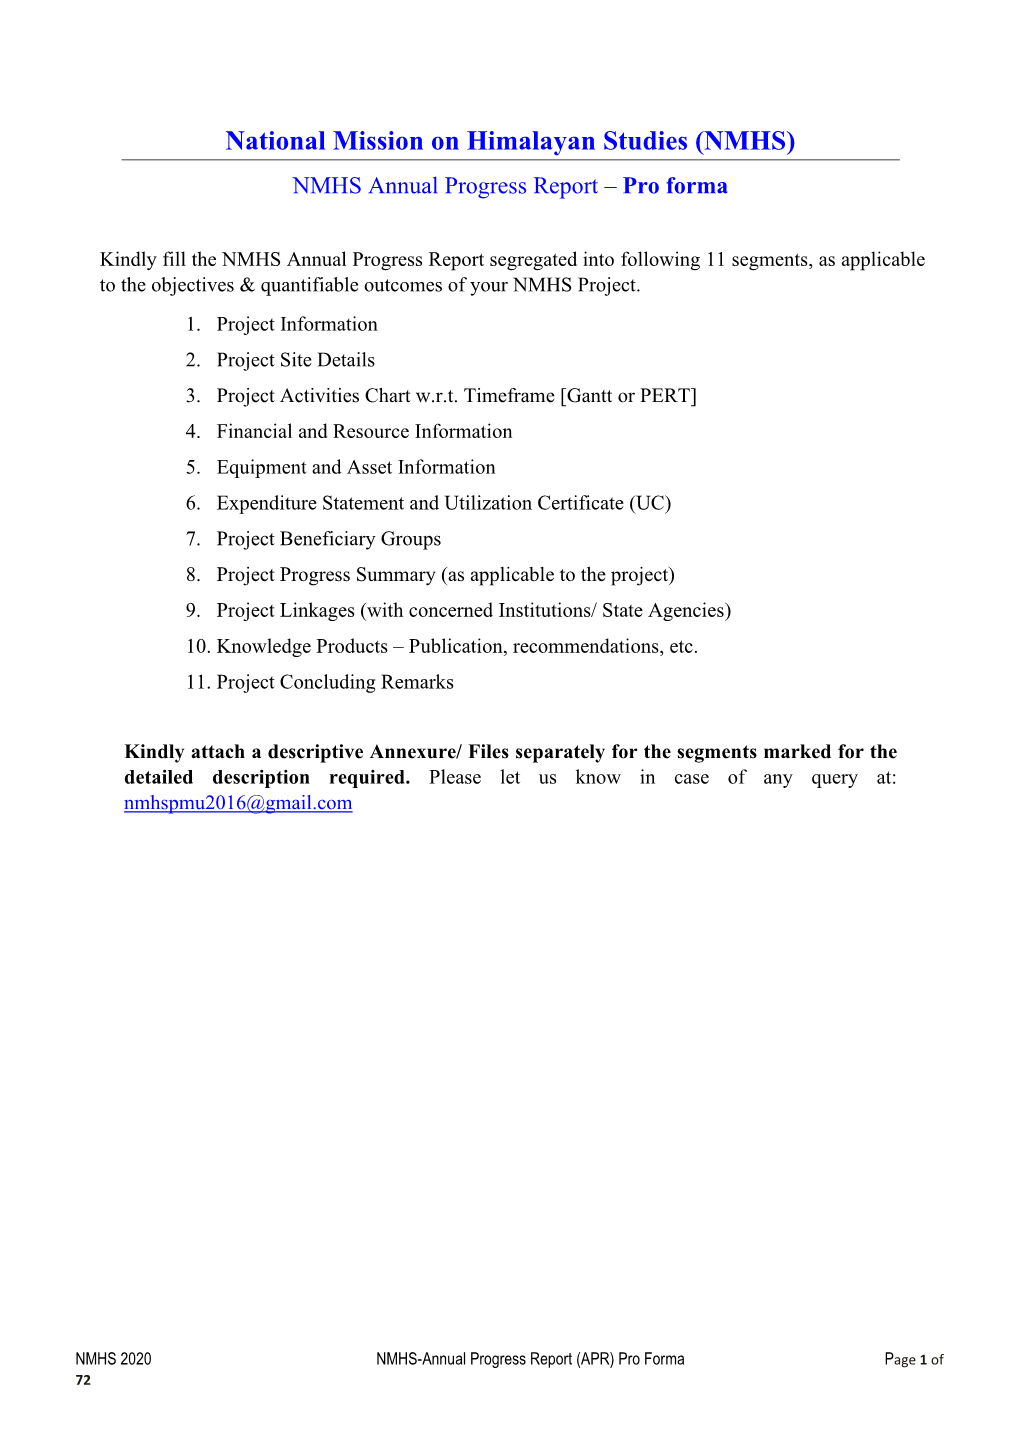 2020 NMHS-Annual Progress Report (APR) Pro Forma Page 1 of 72